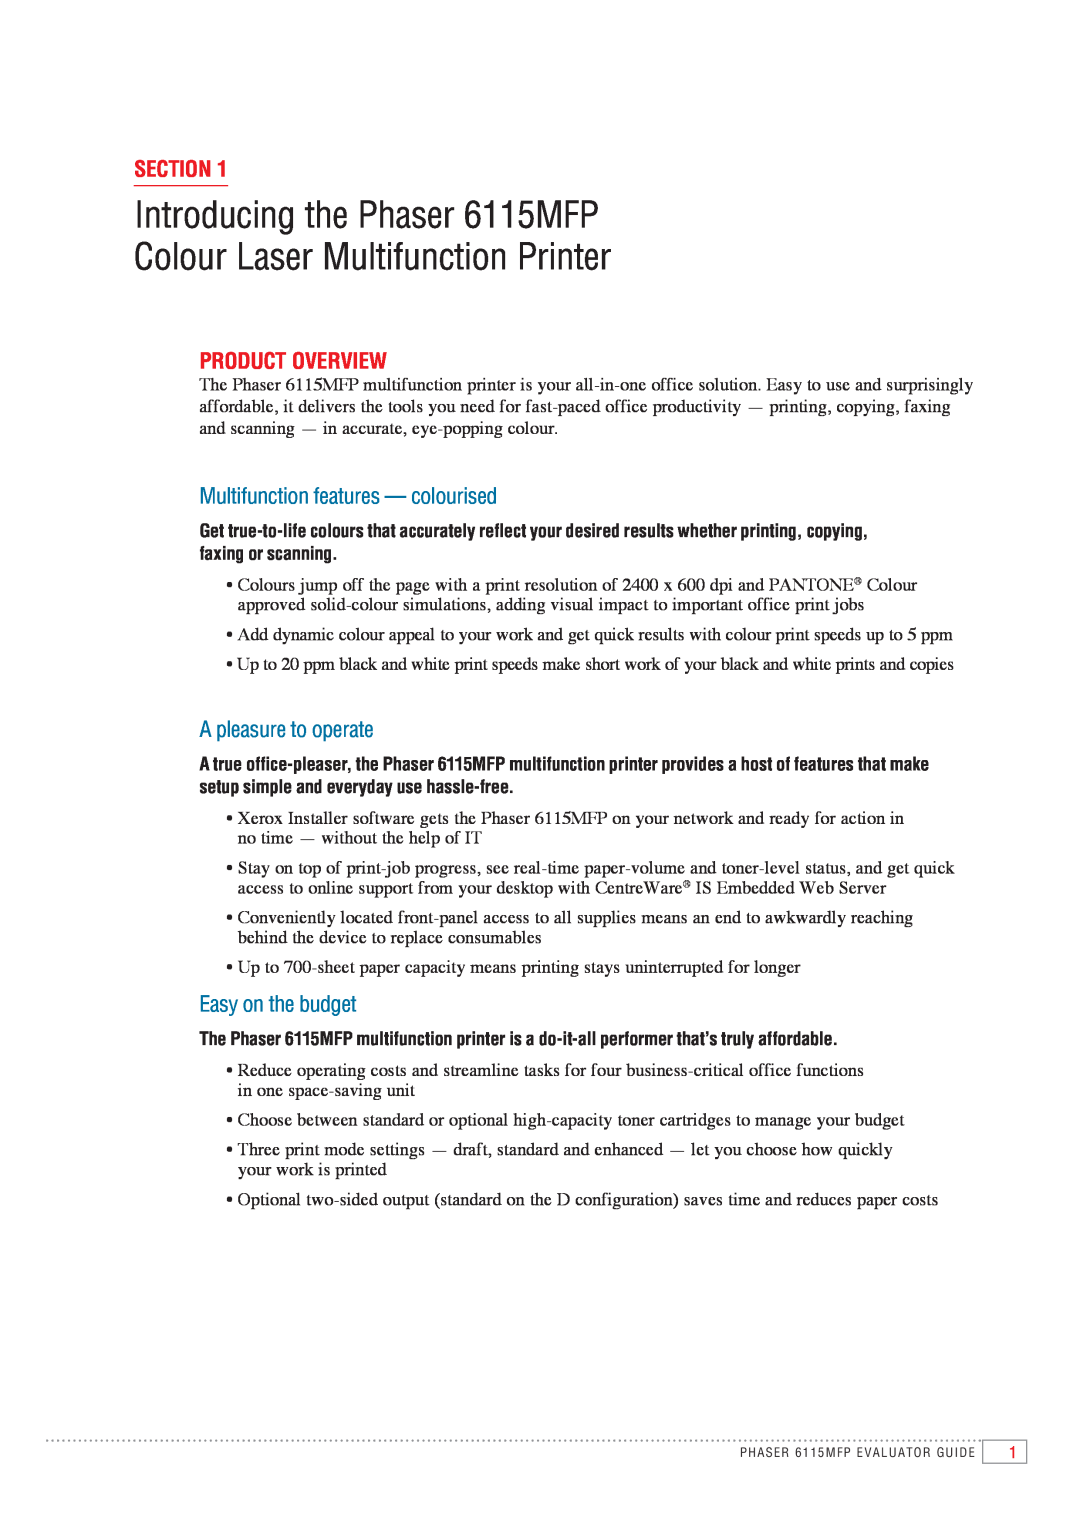 Xerox Introducing the Phaser 6115MFP Colour Laser Multifunction Printer, Section, Product Overview, Easy on the budget 